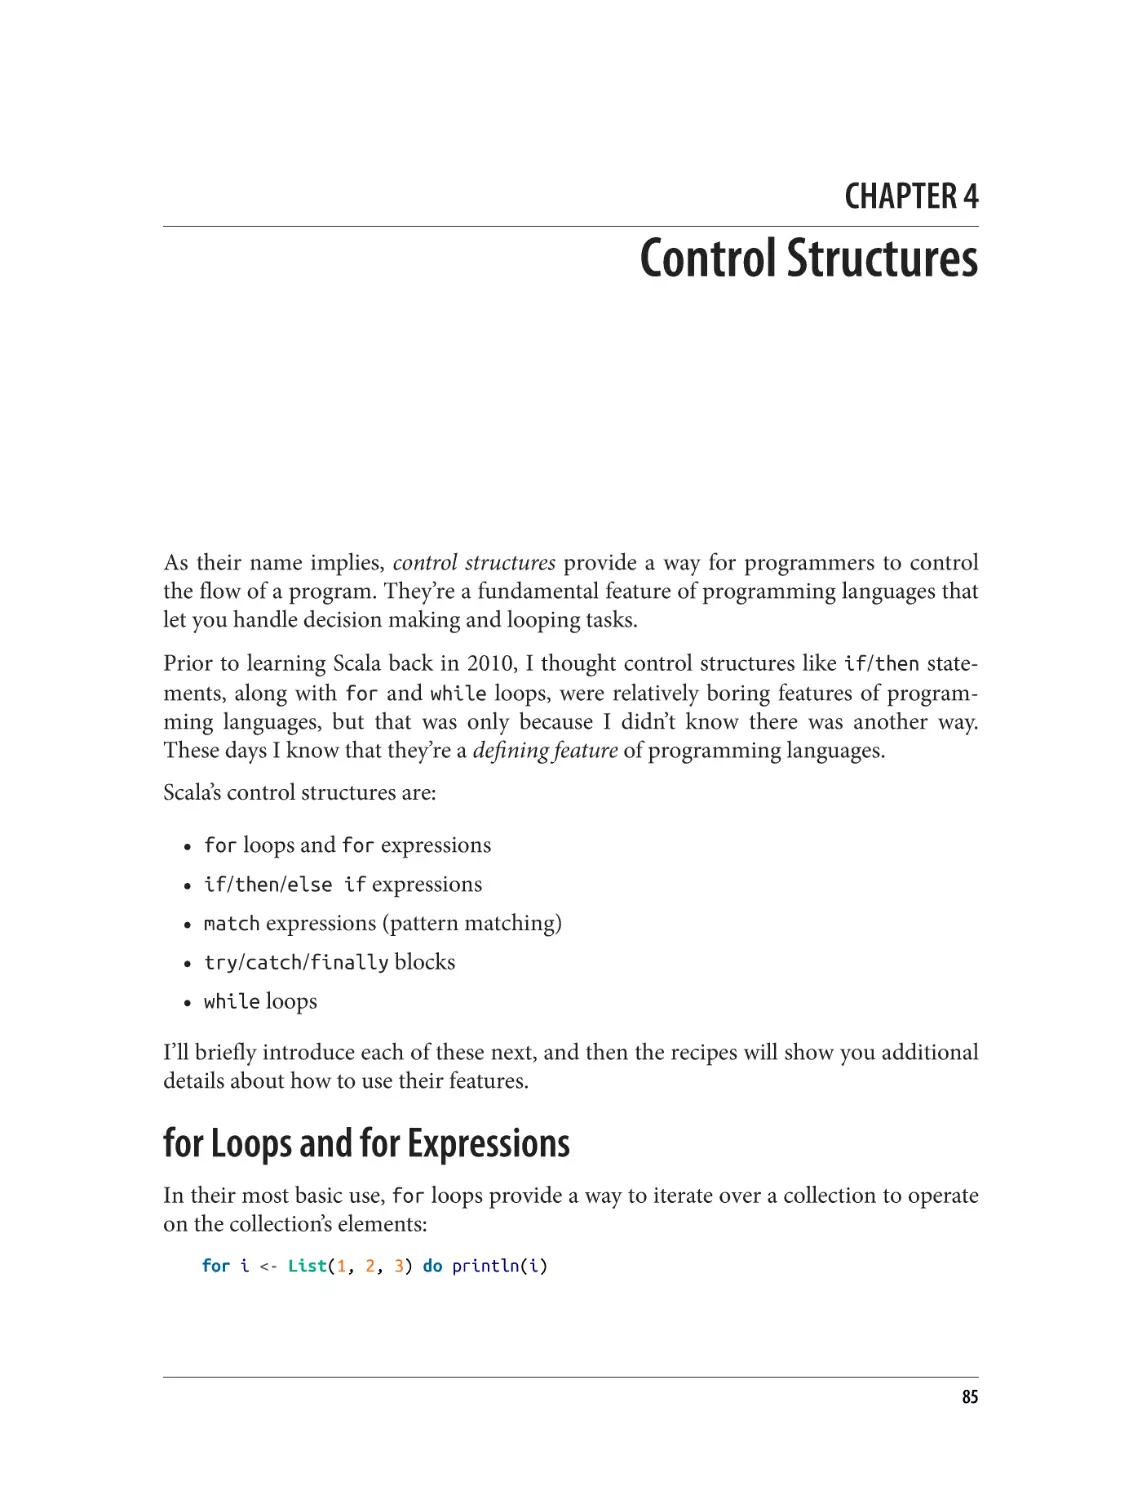 Chapter 4. Control Structures
for Loops and for Expressions